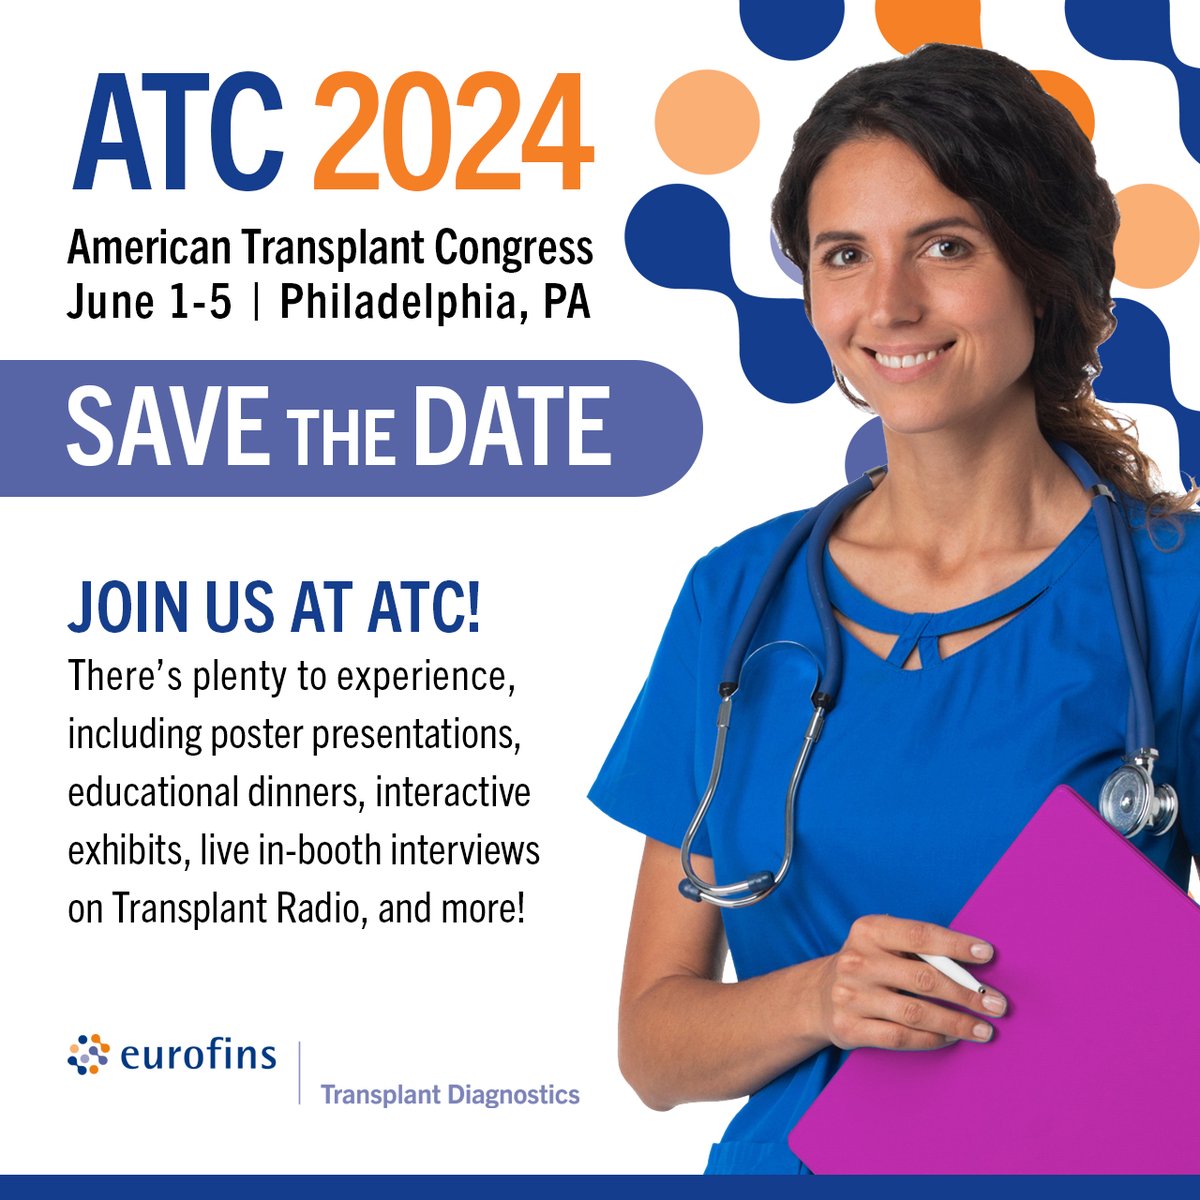 Save the Date: June 1-5 👉 #ATC2024philly 🔔 Don't miss important updates, FOLLOW us and turn on the notification bell. See you in #Philadelphia. @ATCMeeting #ATC2024 #MedTwitter #ATC2024eurofinstransplant